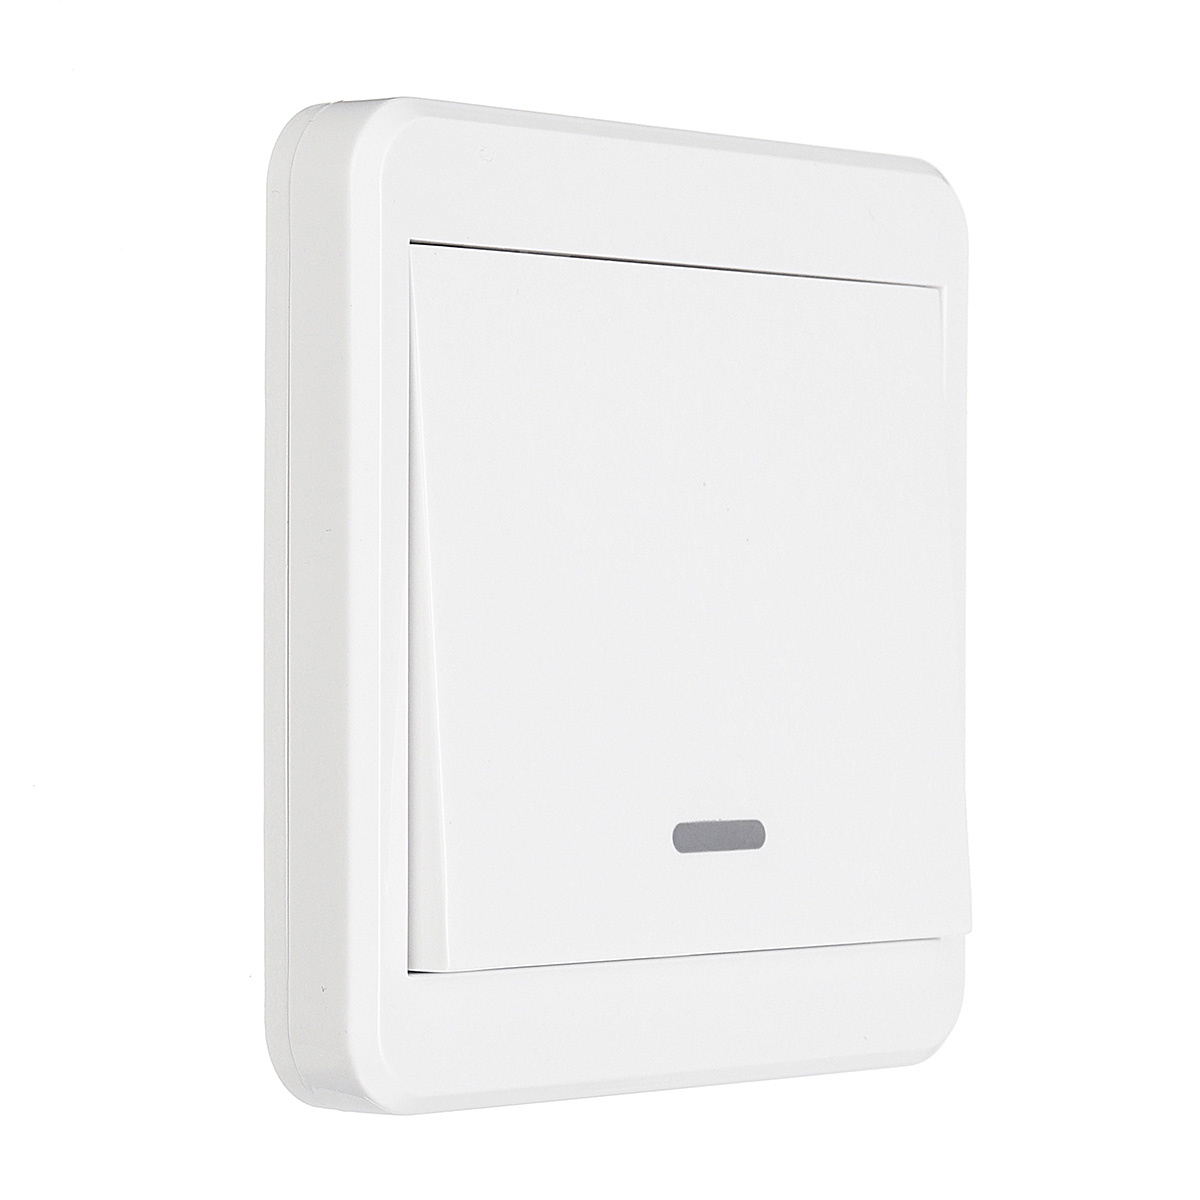 123-Way-Push-Button-Switch-Remote-Control-Switch-86-Wall-Panel-315MHz-Wireless-1334553